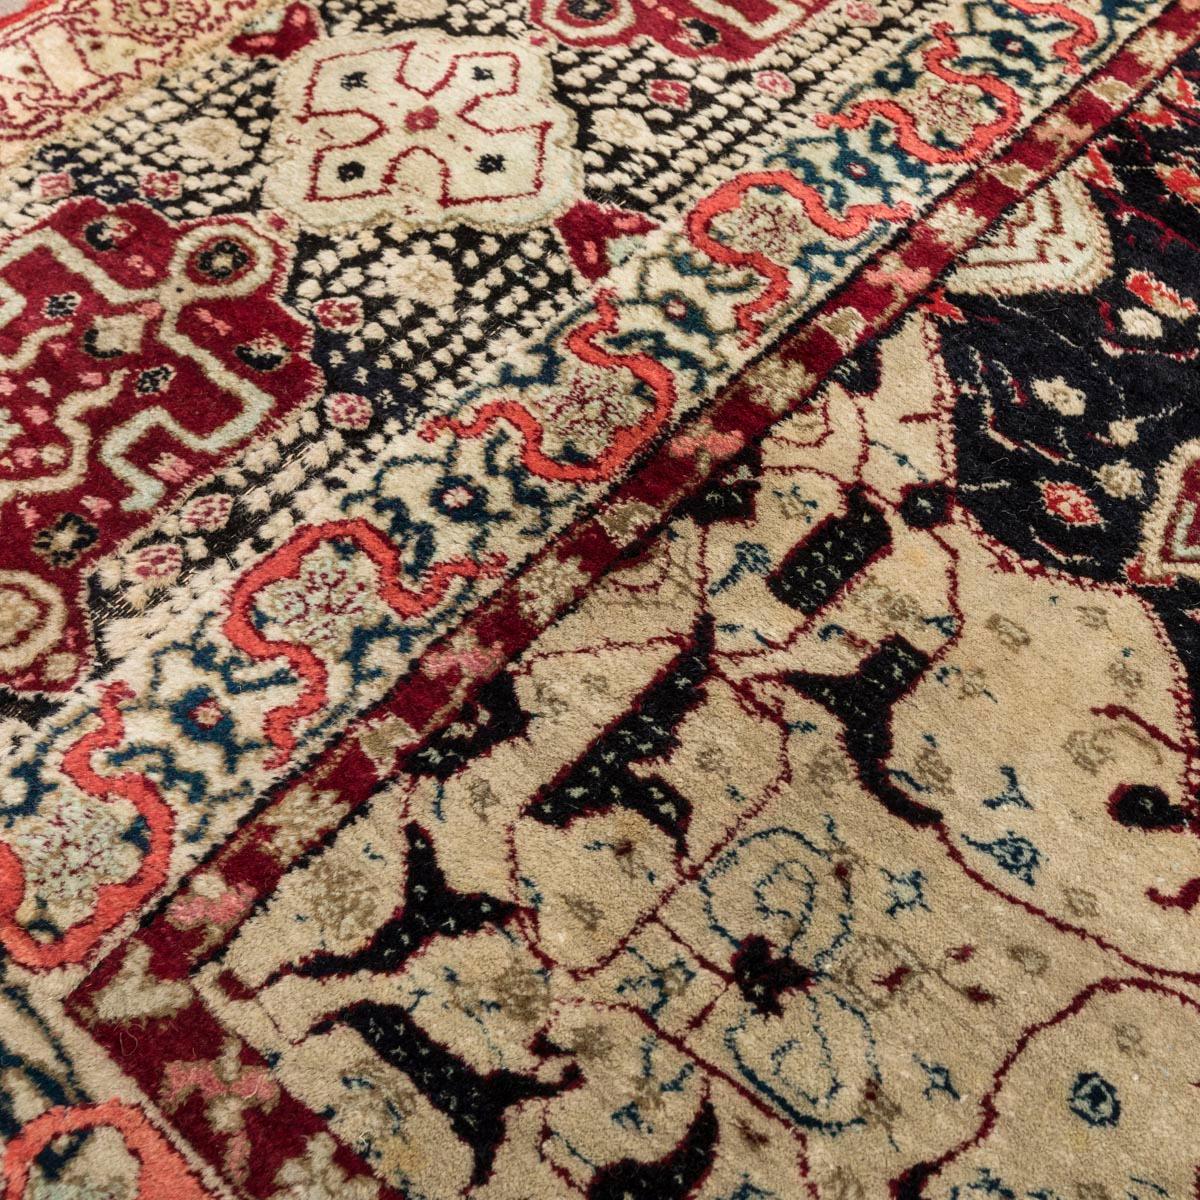 Antique Agra India Wool Rug. Circa. 1930. 3.50 x 2.70 m. For Sale 3